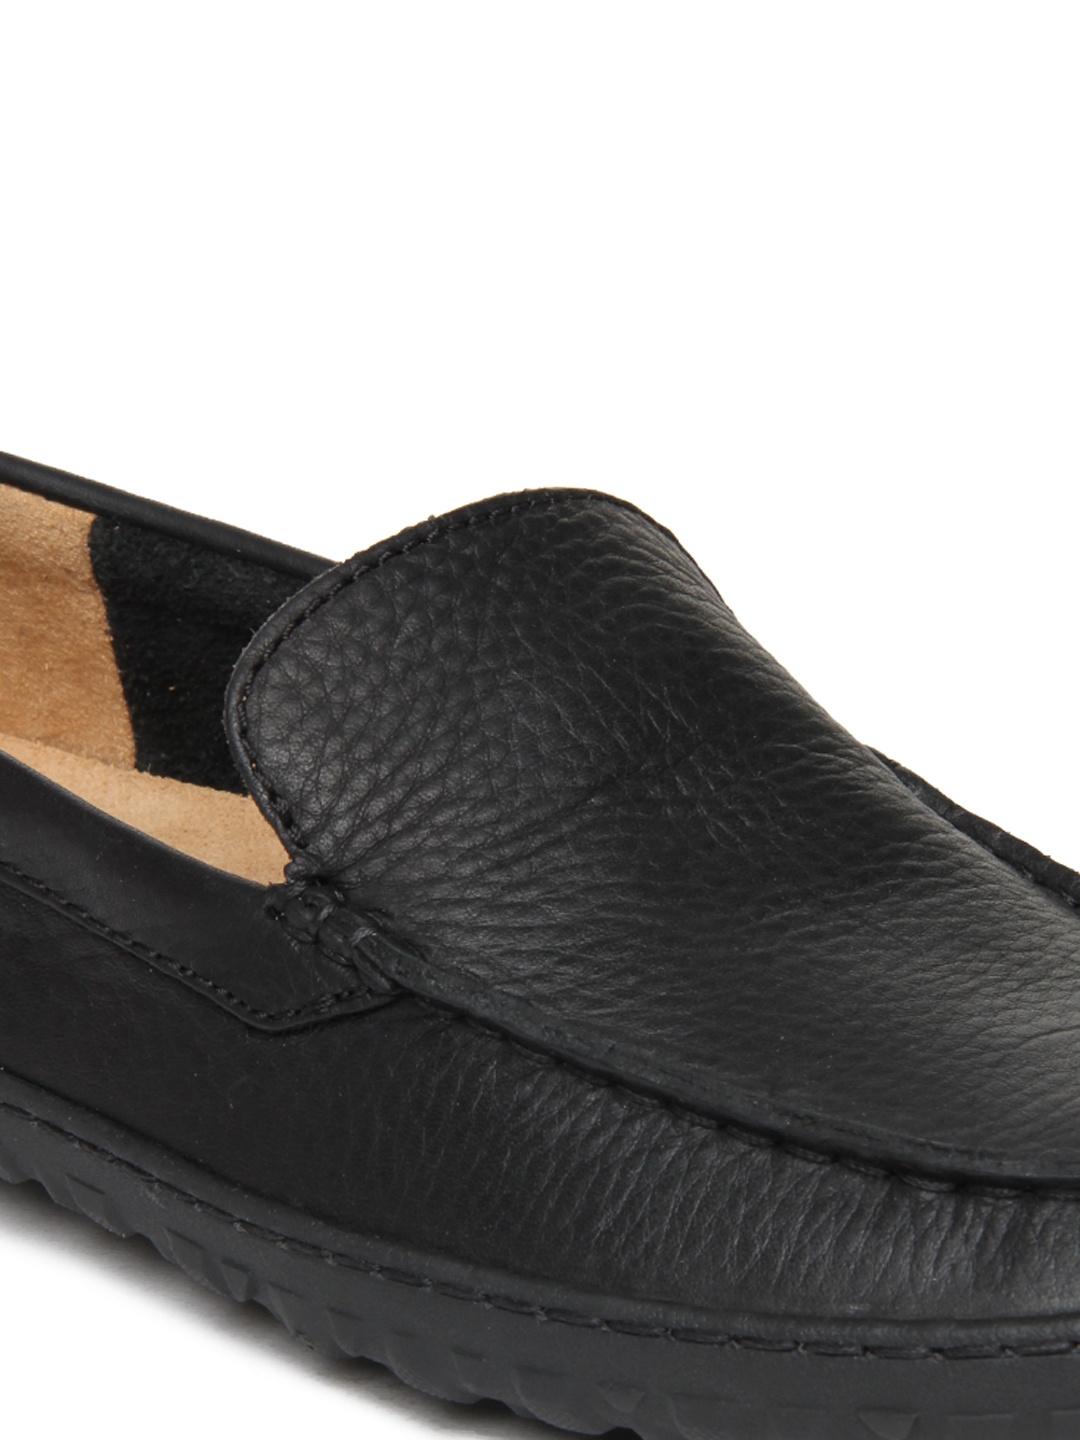 clarks richhill flow loafers online